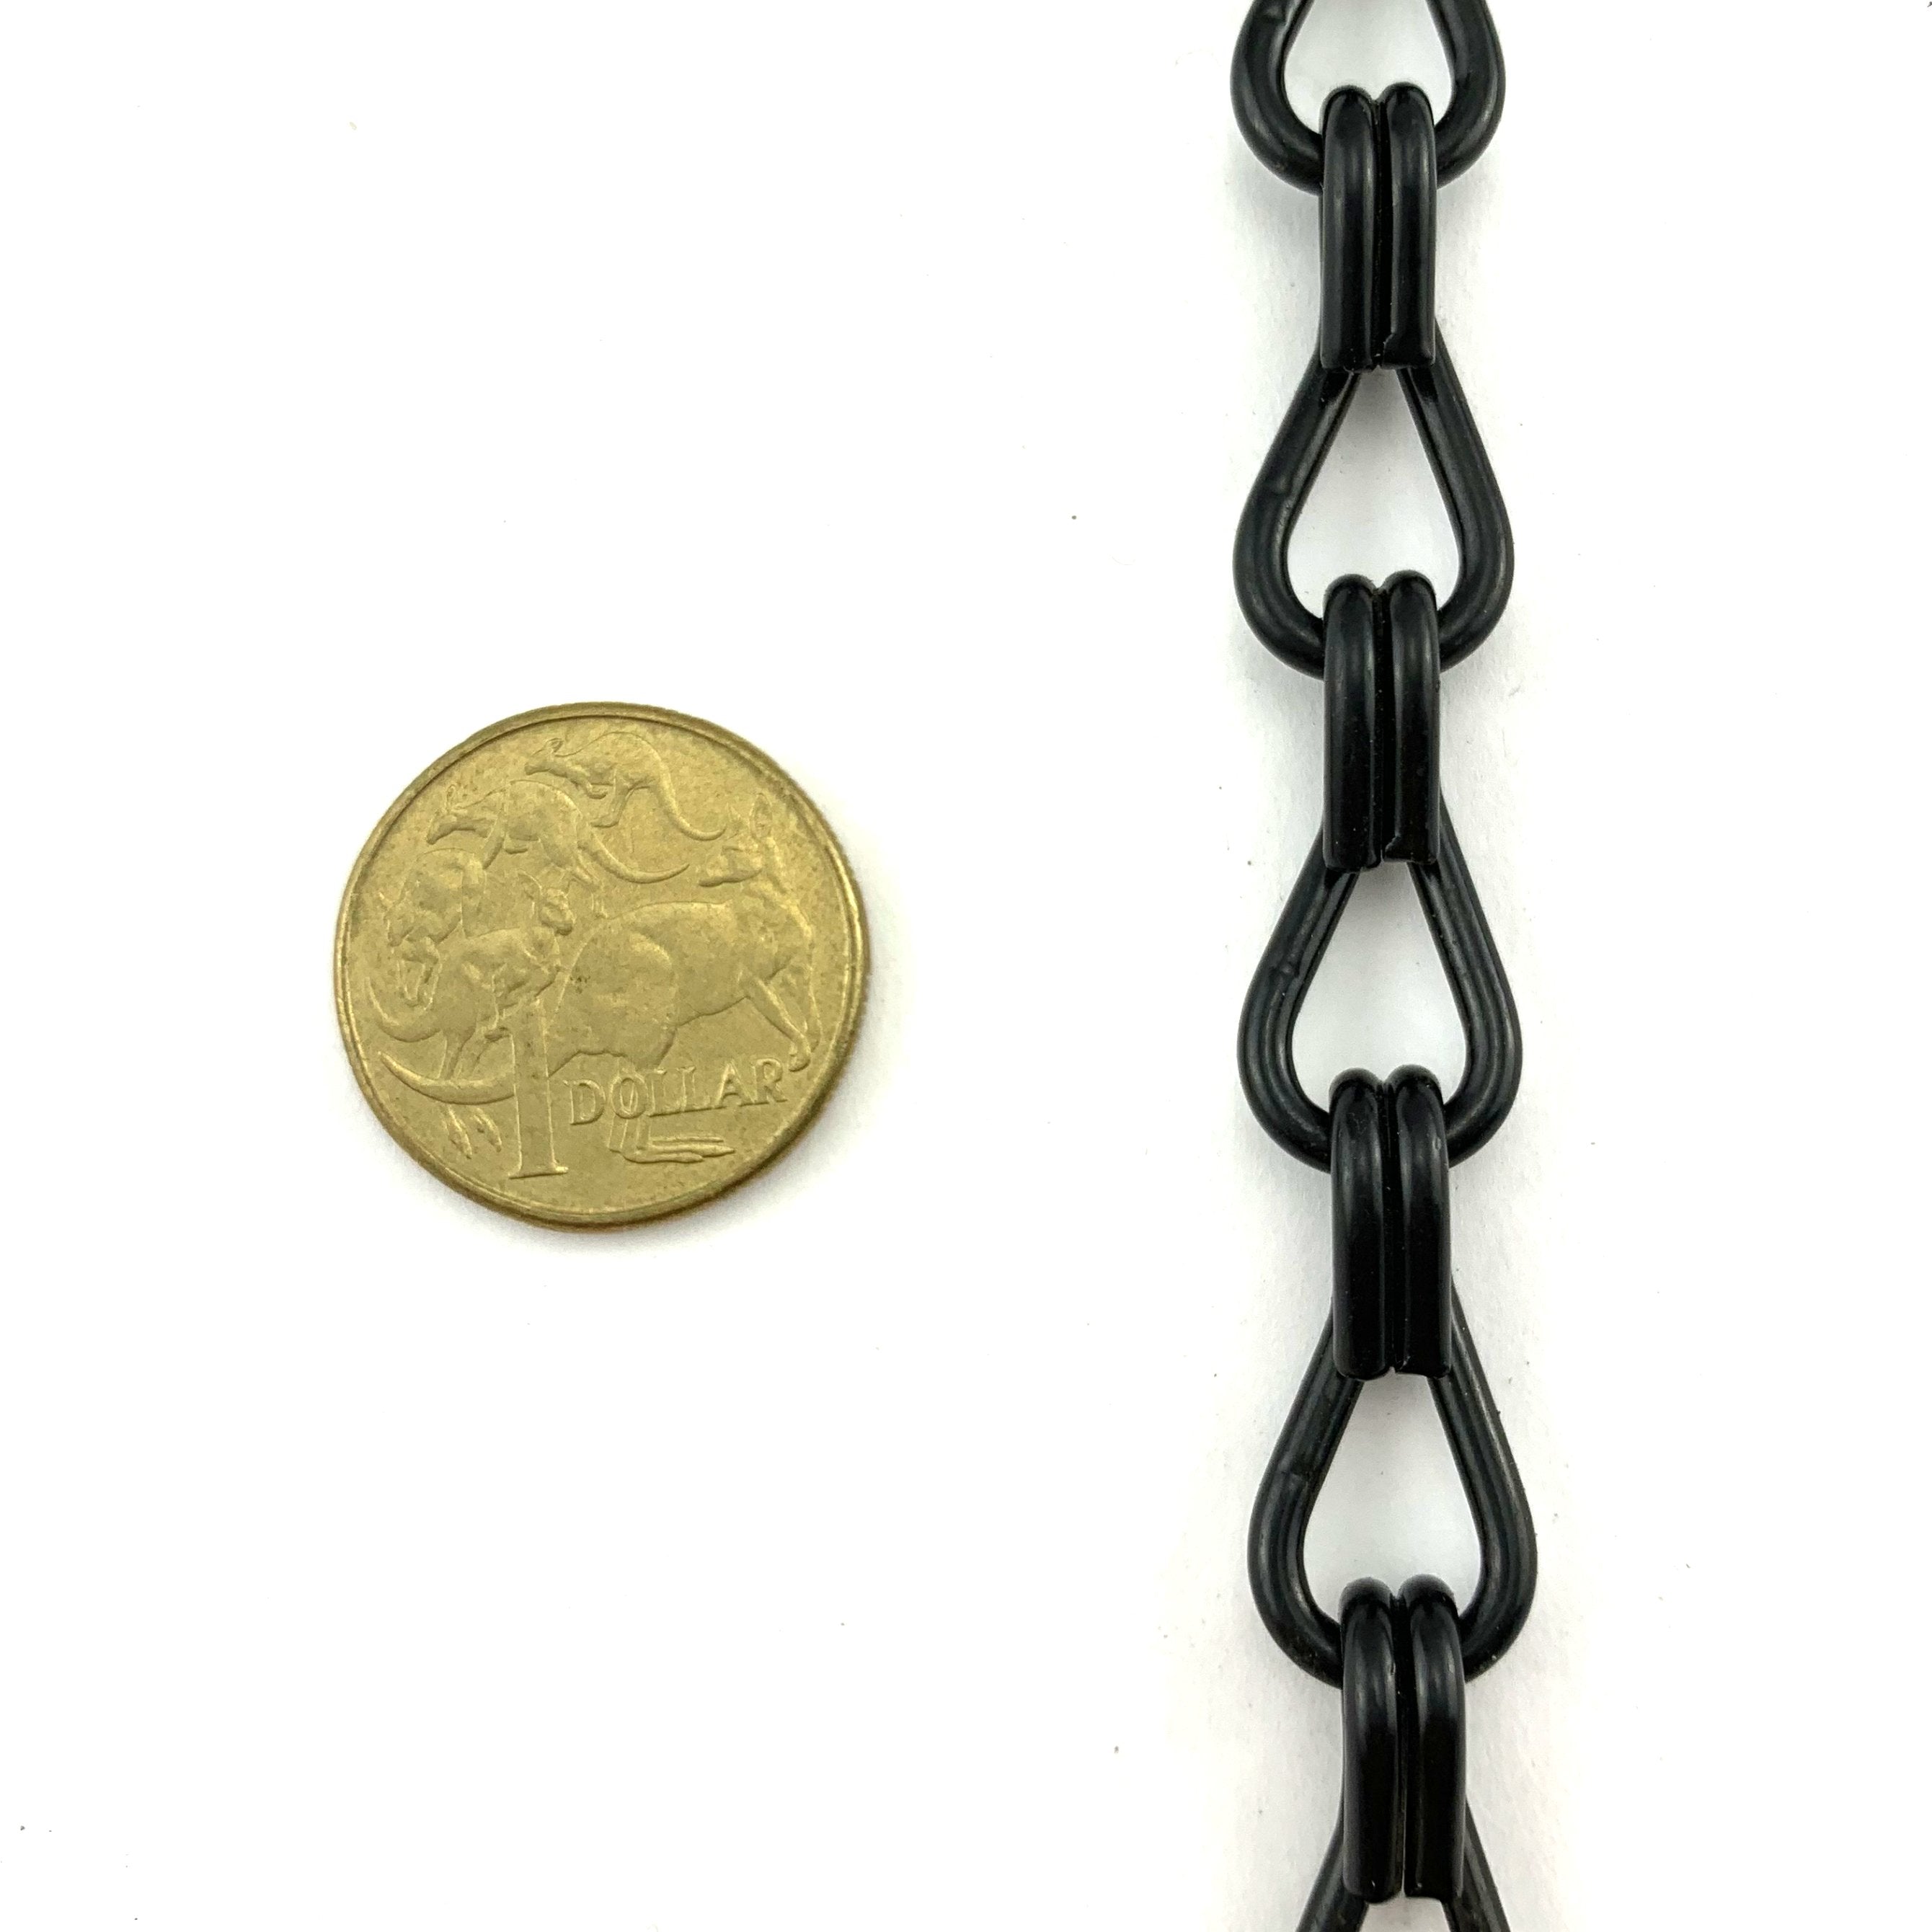 Commercial grade double jack chain in black powder coated finish, size: 2.5mm. Order by the metre. Melbourne, Australia.